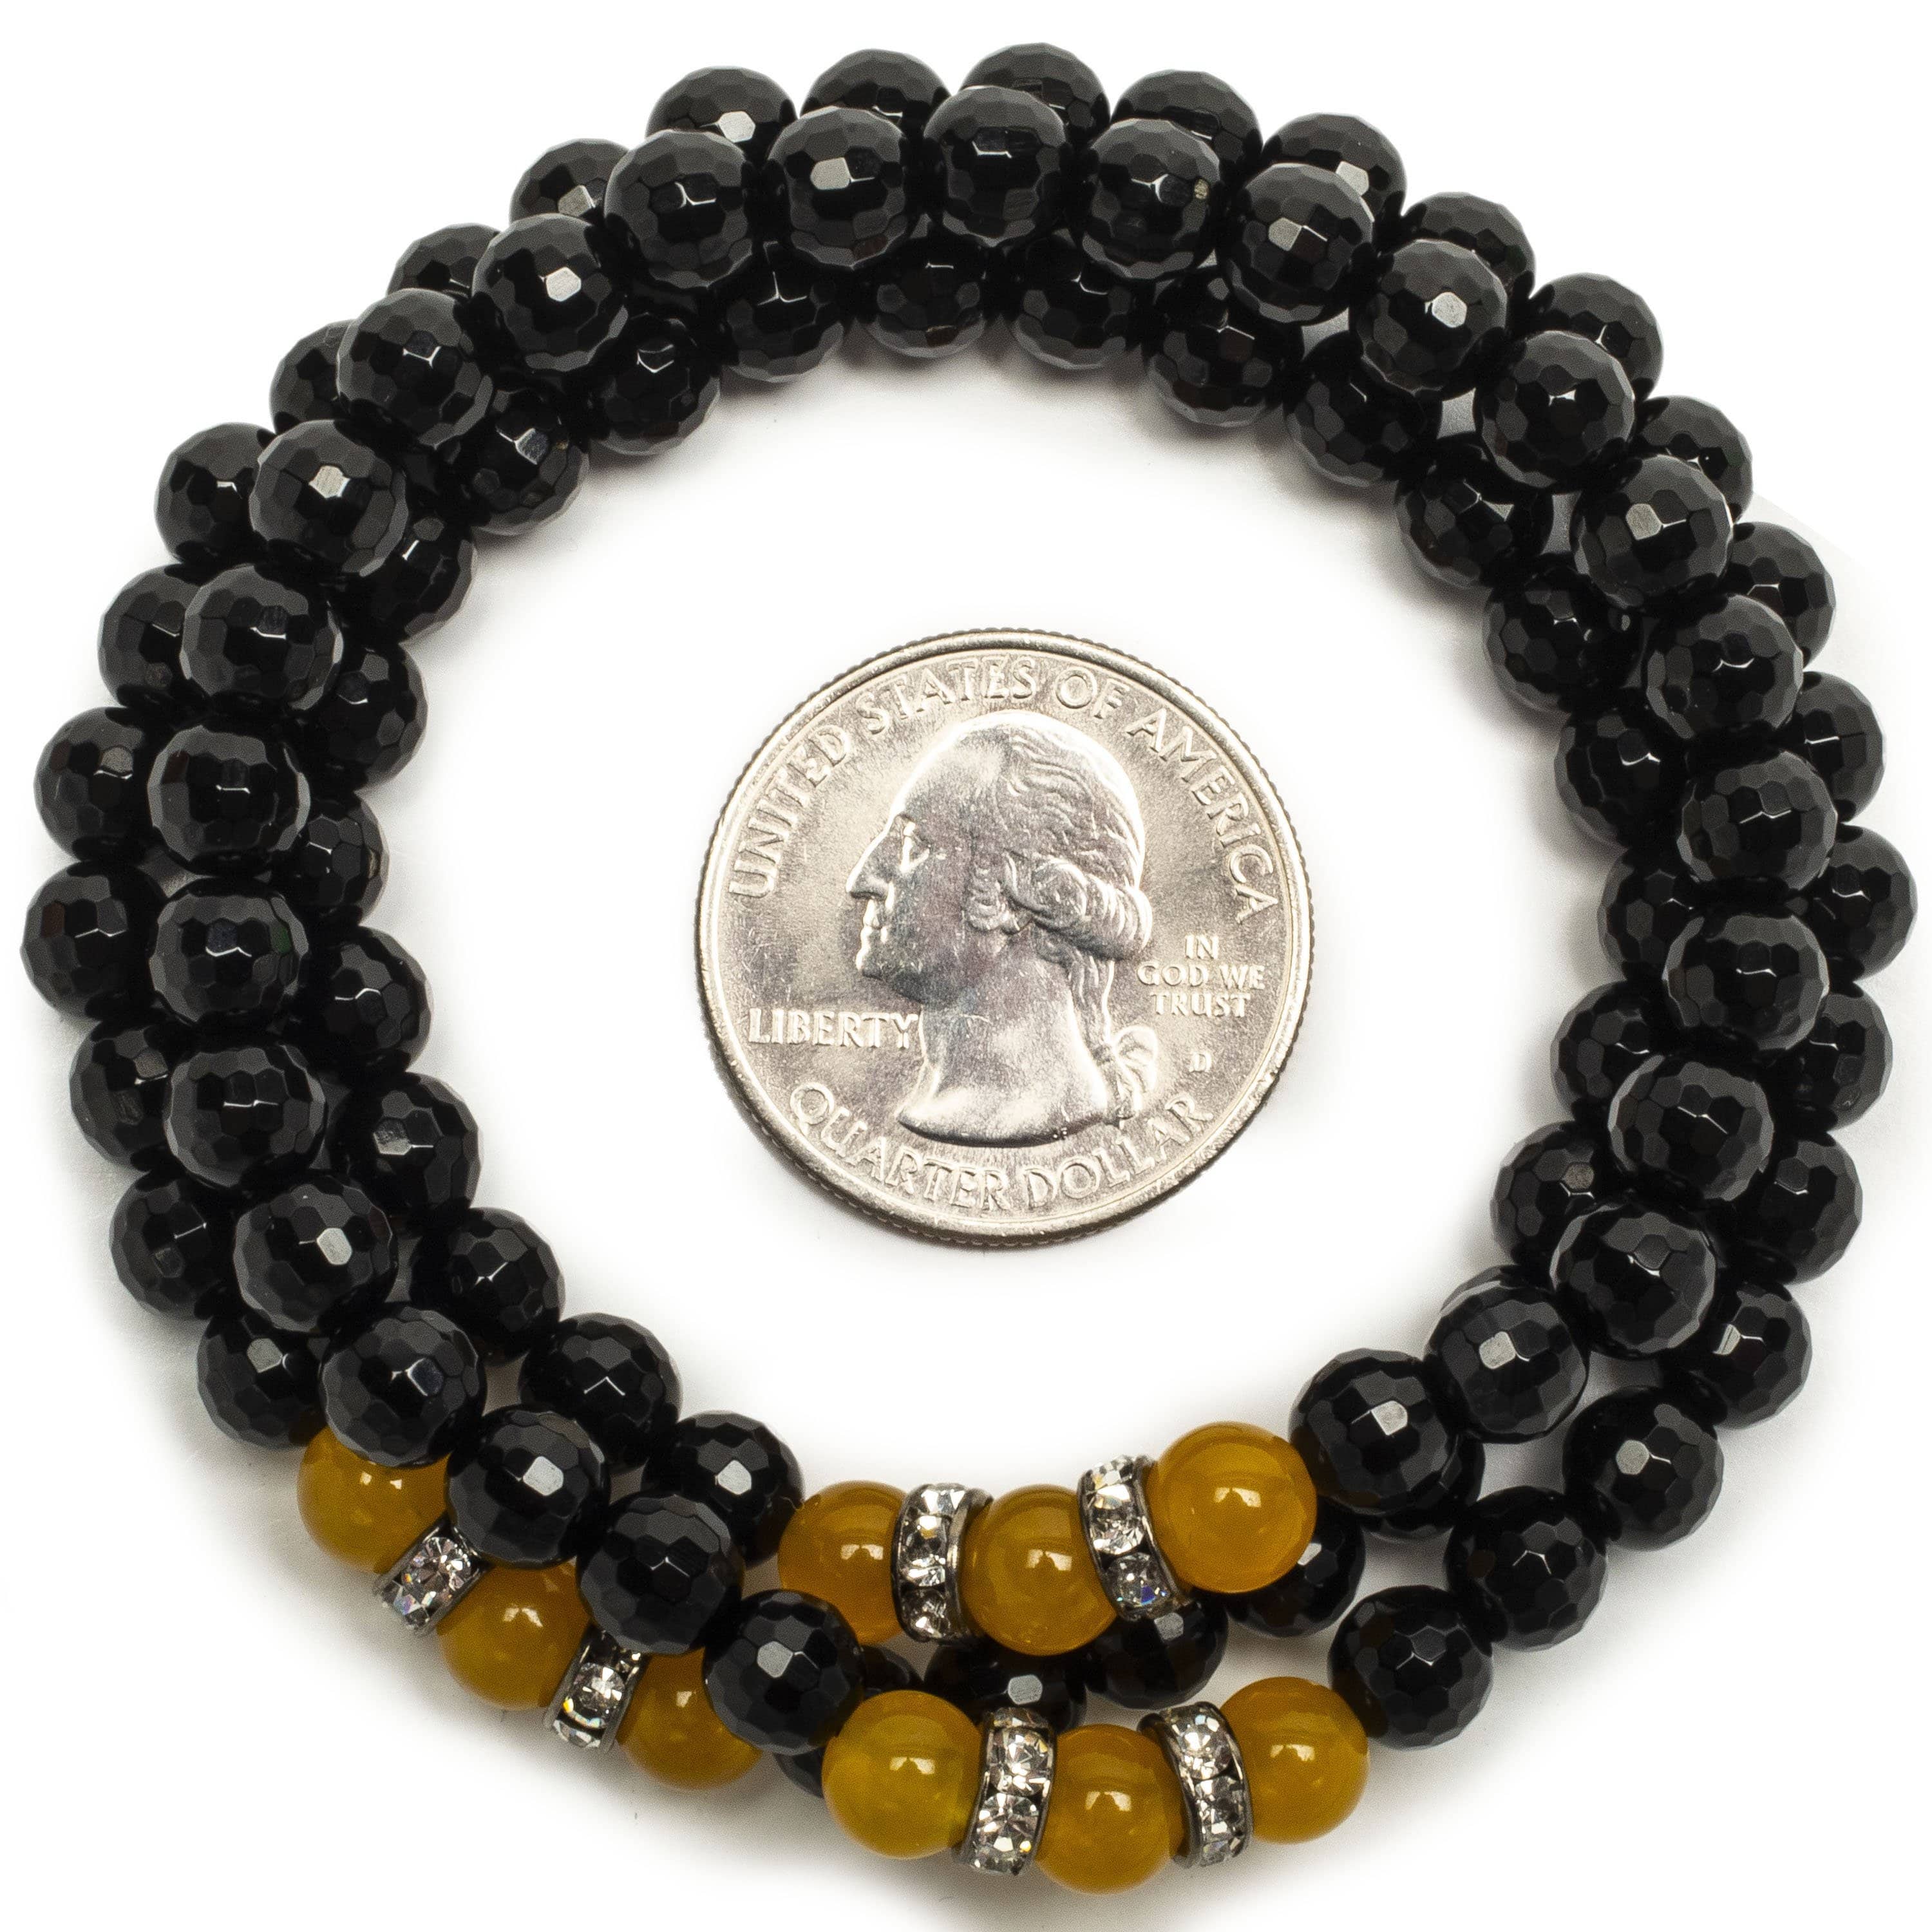 Kalifano Gemstone Bracelets Black Agate 6mm Beads with Yellow Agate and Silver Crystal Accent Beads Triple Wrap Elastic Gemstone Bracelet WHITE-BGI3-063